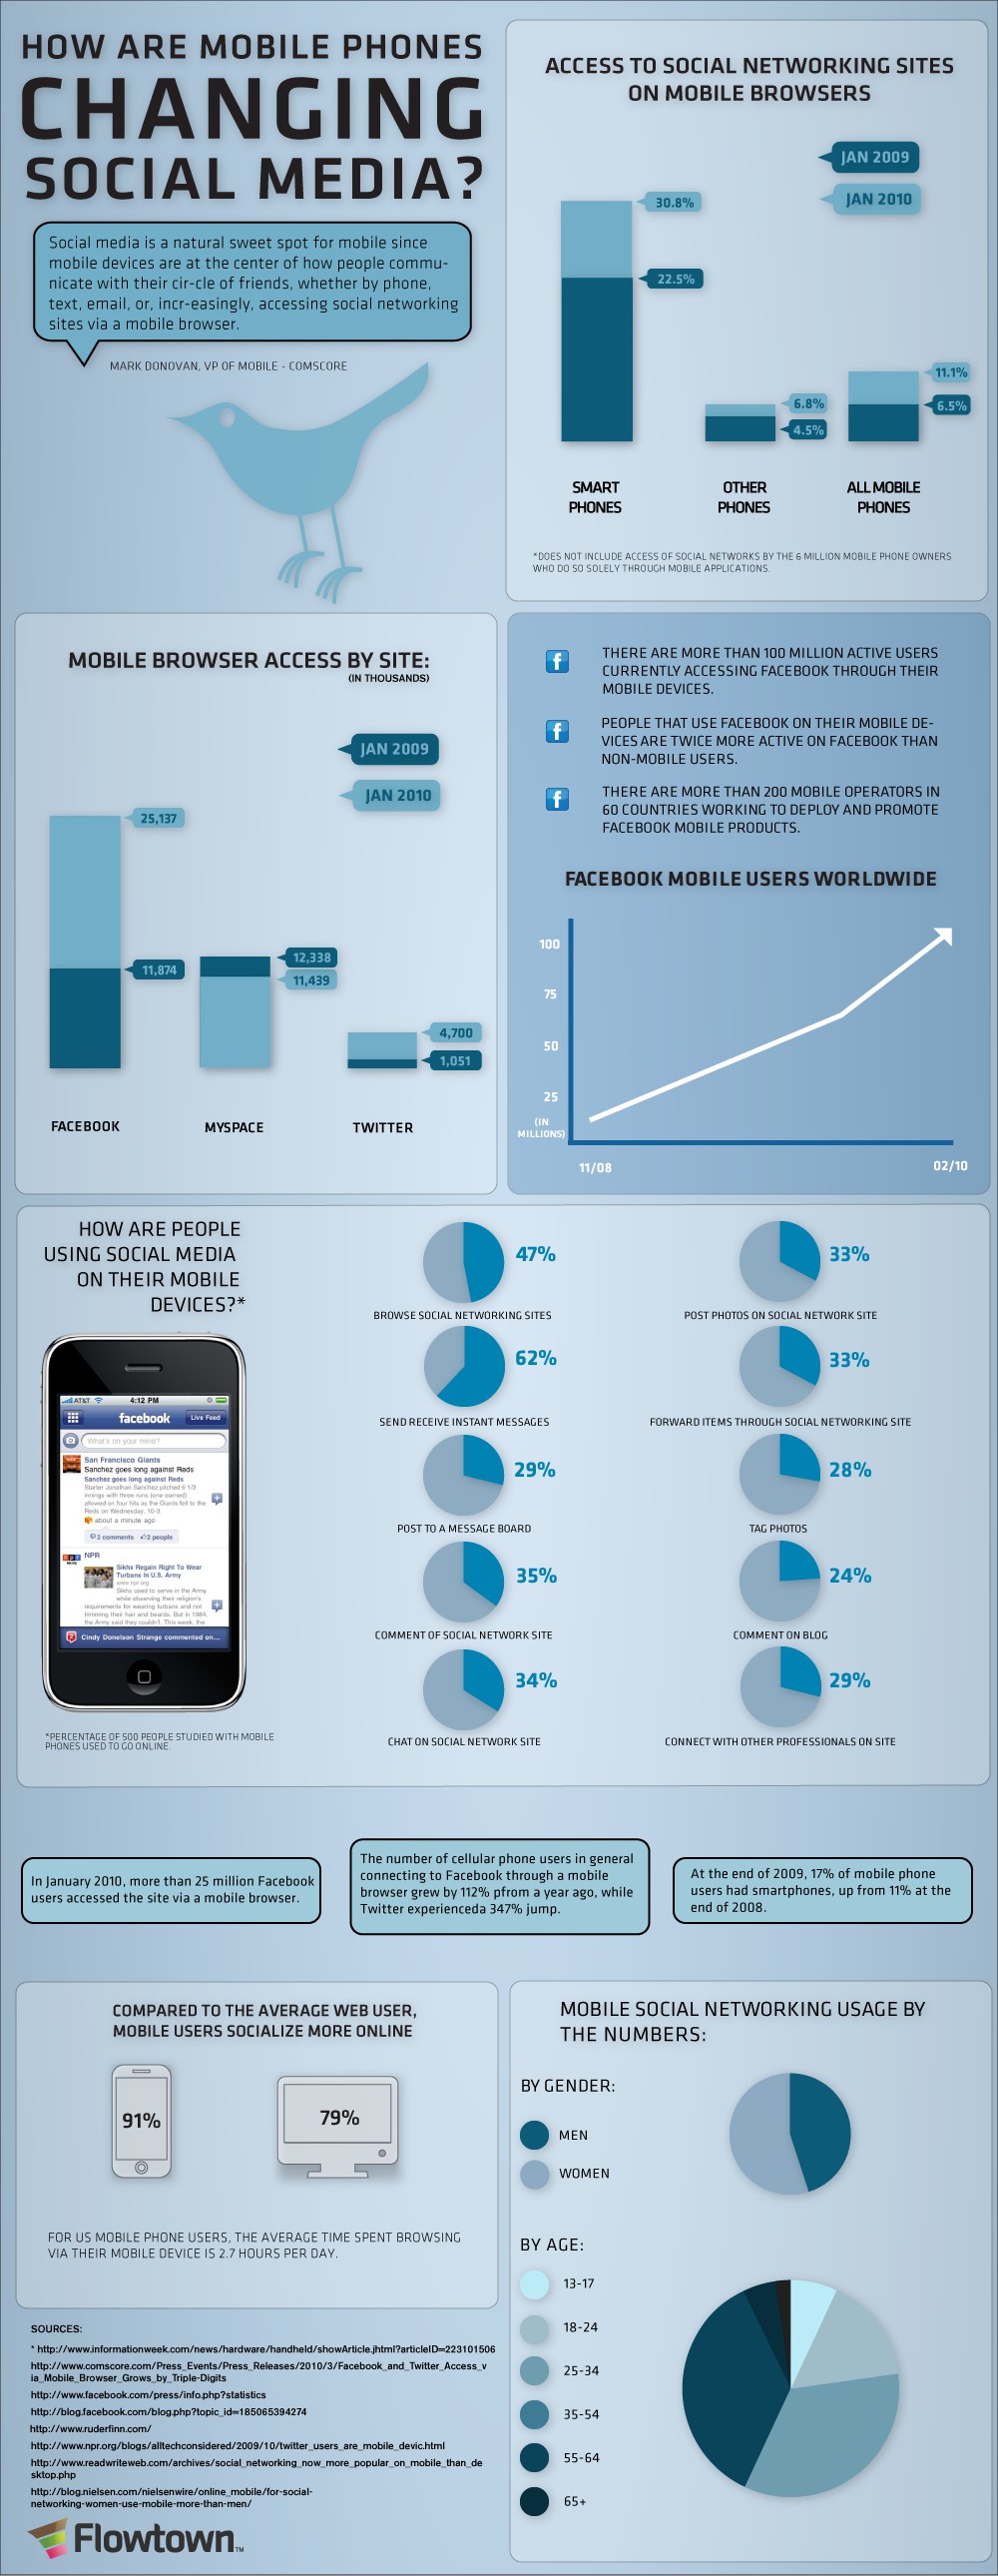 social-networking-on-mobile-phones-infographic